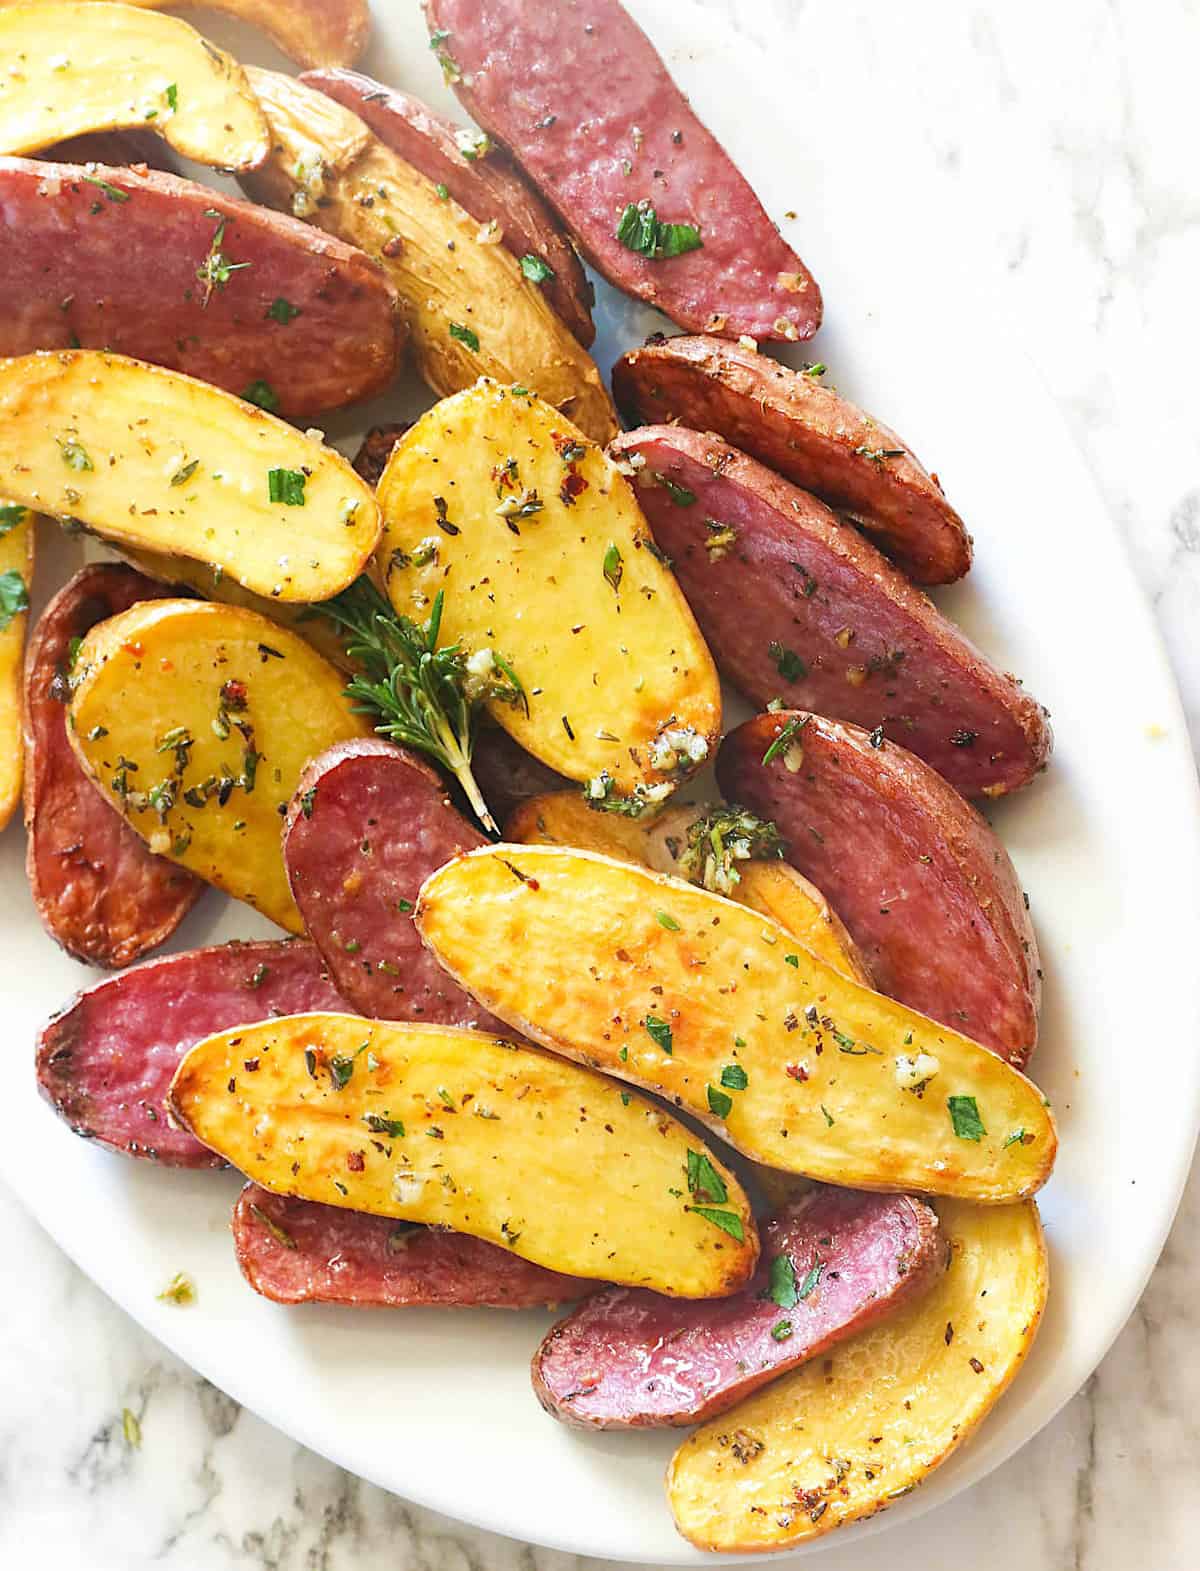 Offering freshly baked sweet potatoes to your heart's content